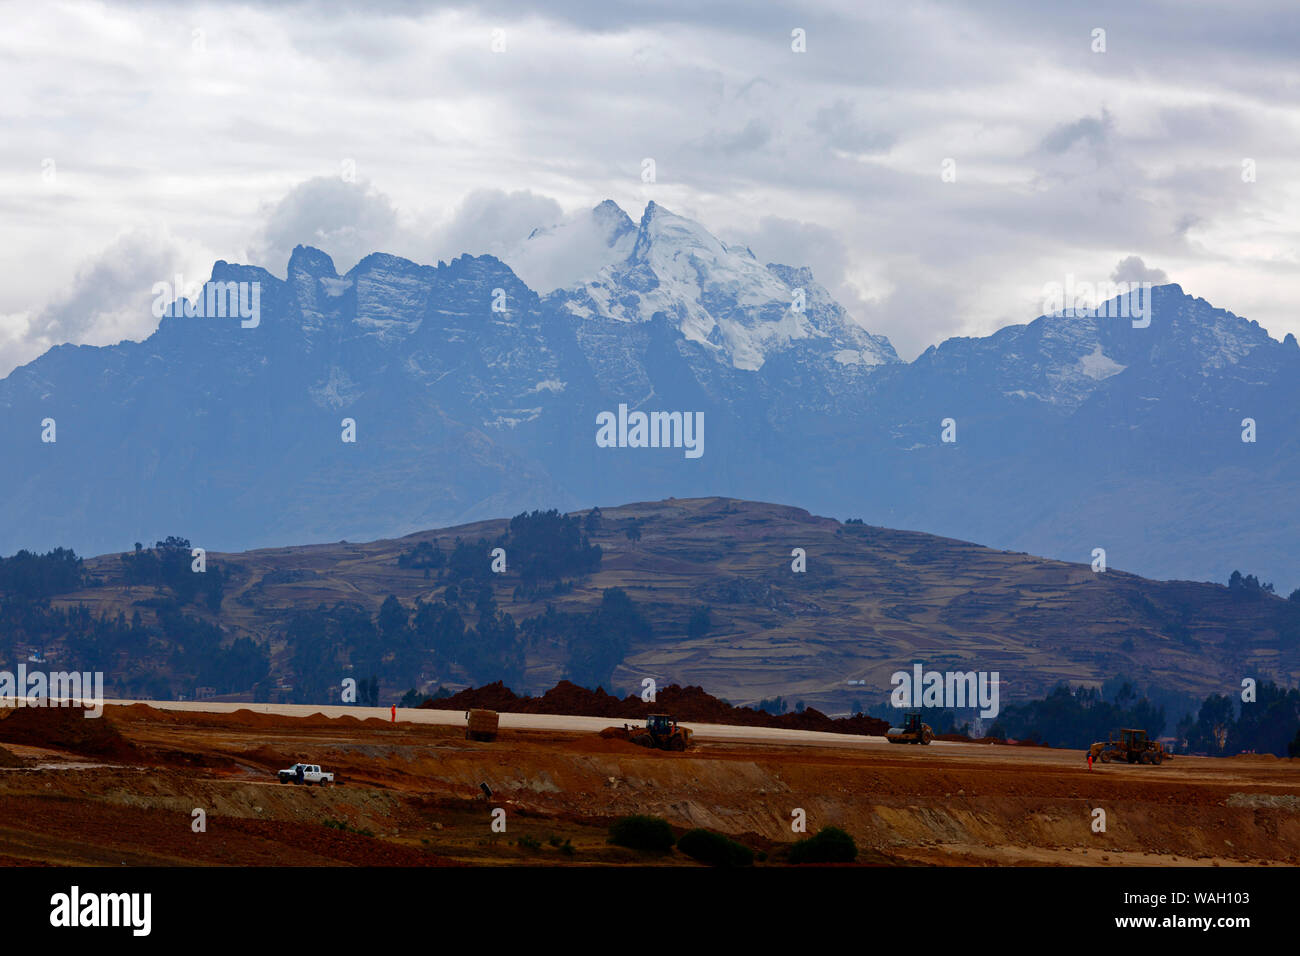 Heavy machinery working moving earth, the start of construction at the site of a new international airport at Chinchero for Cusco and Machu Picchu. In the background is Mt Sawasiray, one of the peaks of the Cordillera Urubamba mountain range. Cusco Region, Peru Stock Photo